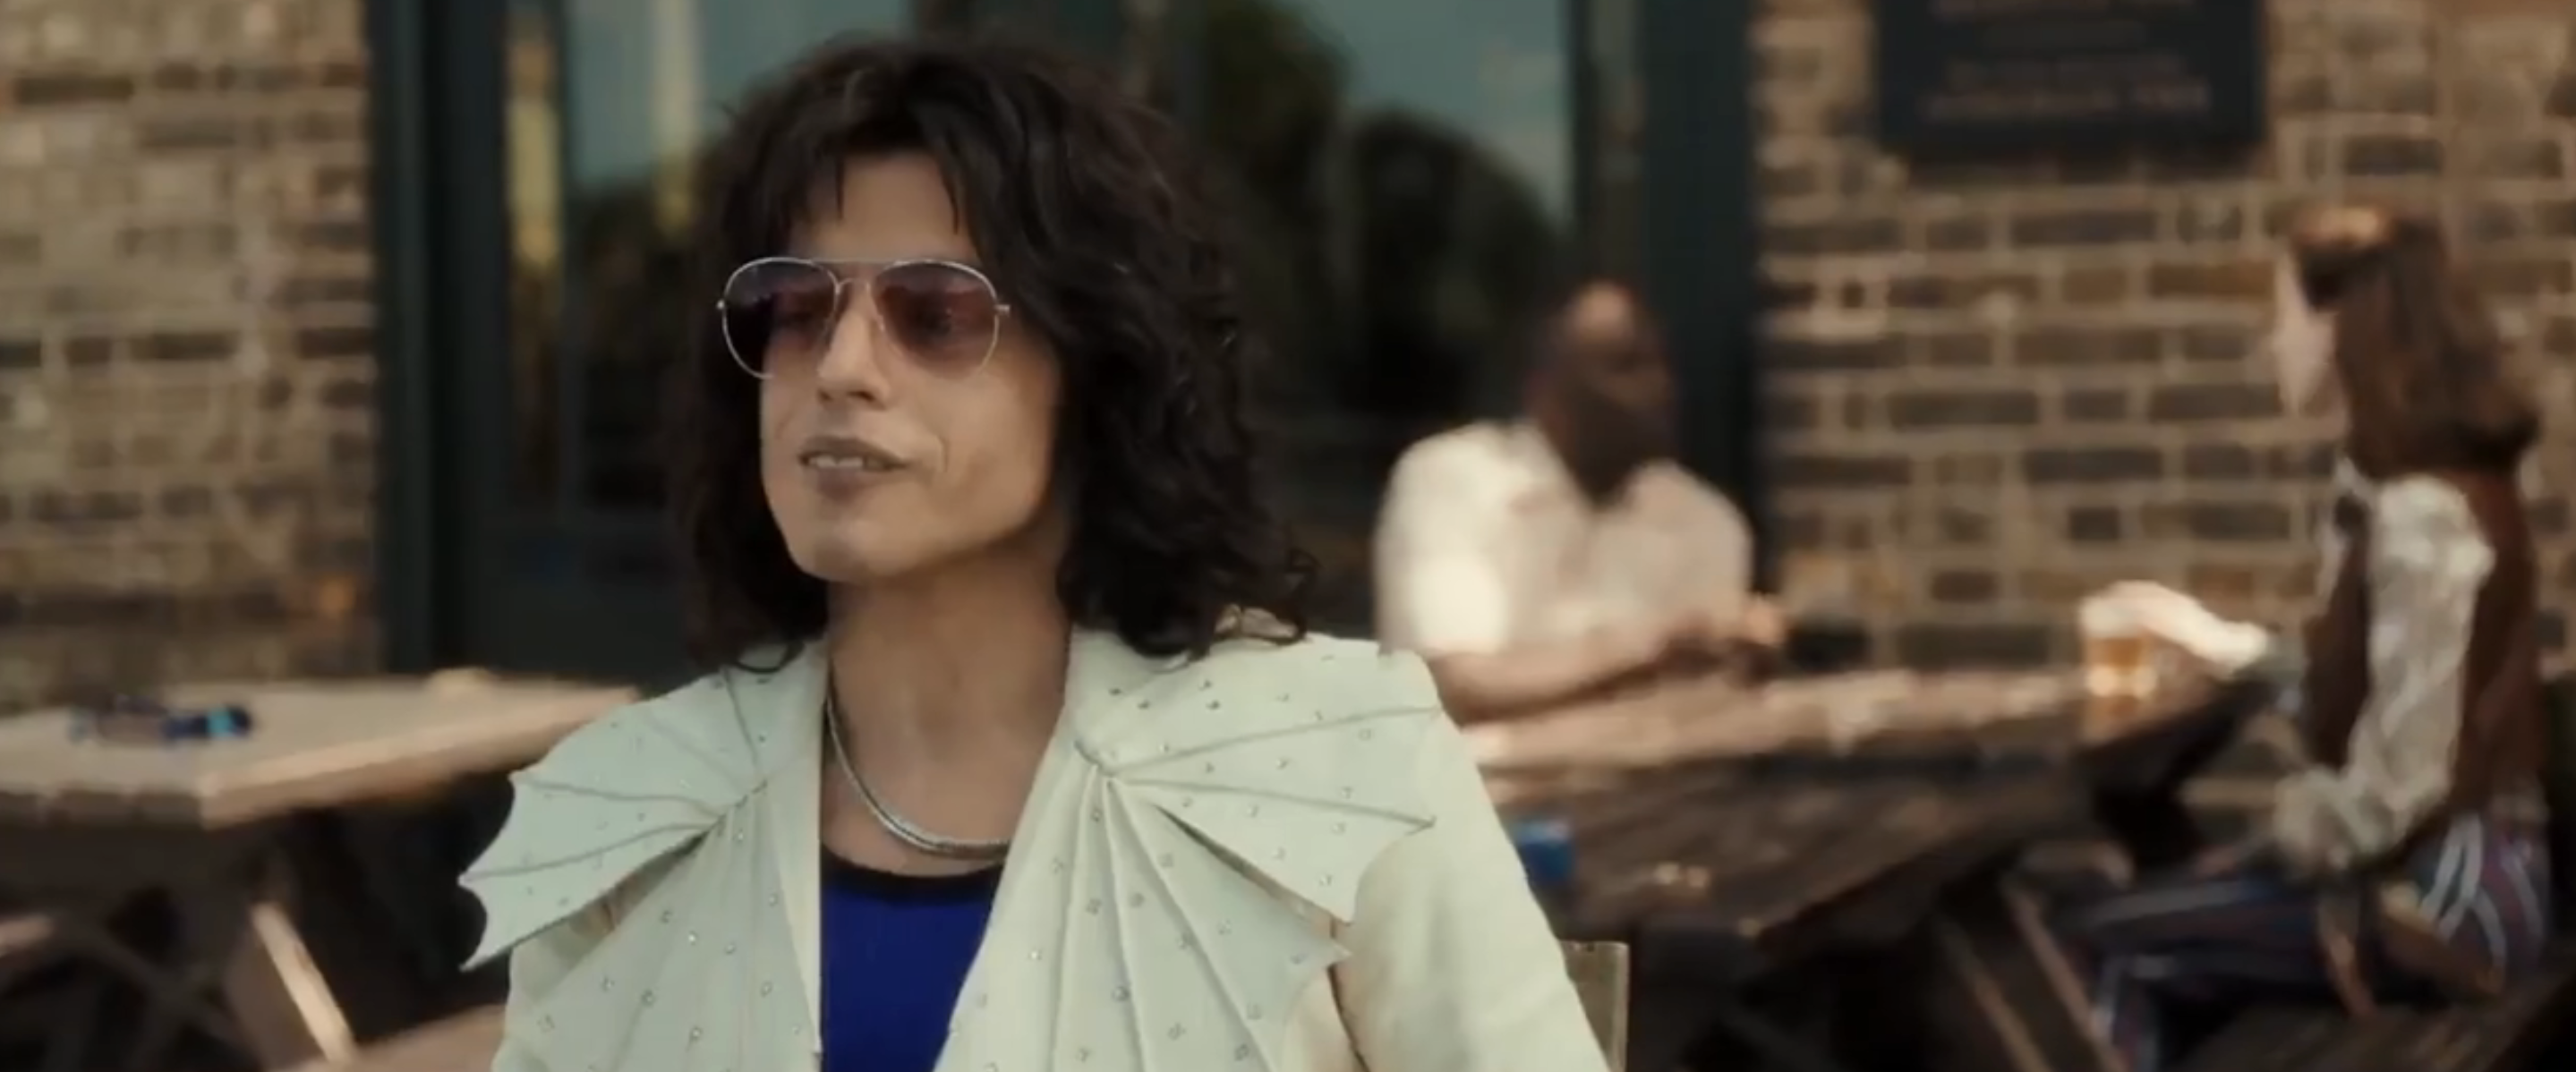 Rami Malek as Freddie Mercury in a patterned blazer and sunglasses seated outside with people in background